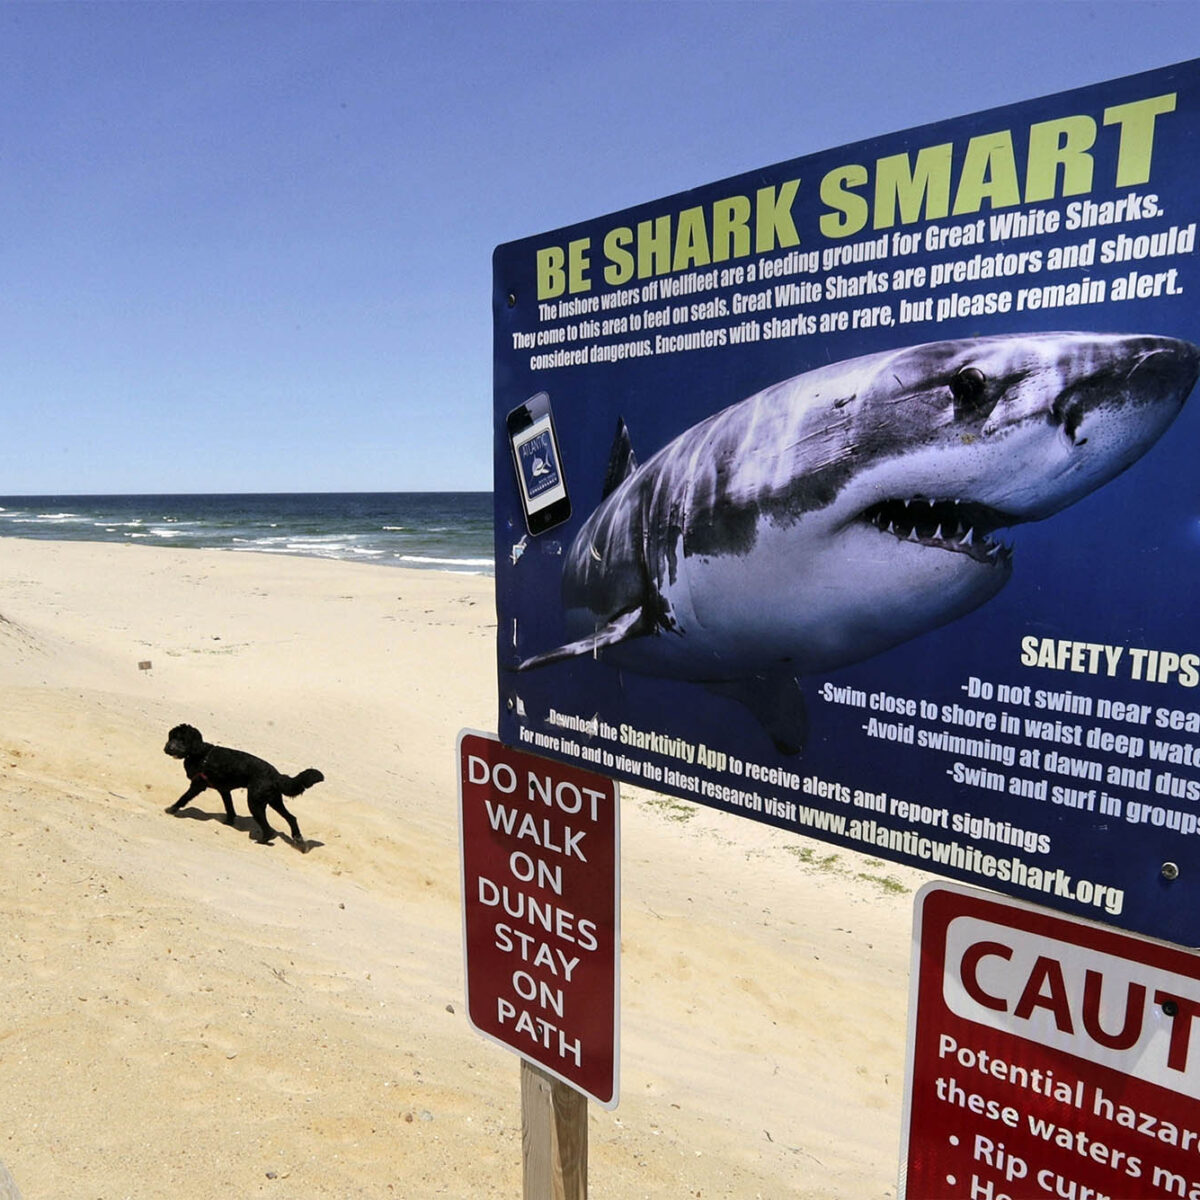 Sharks, Bacteria, No Lifeguards: Is This the End of Swimming in